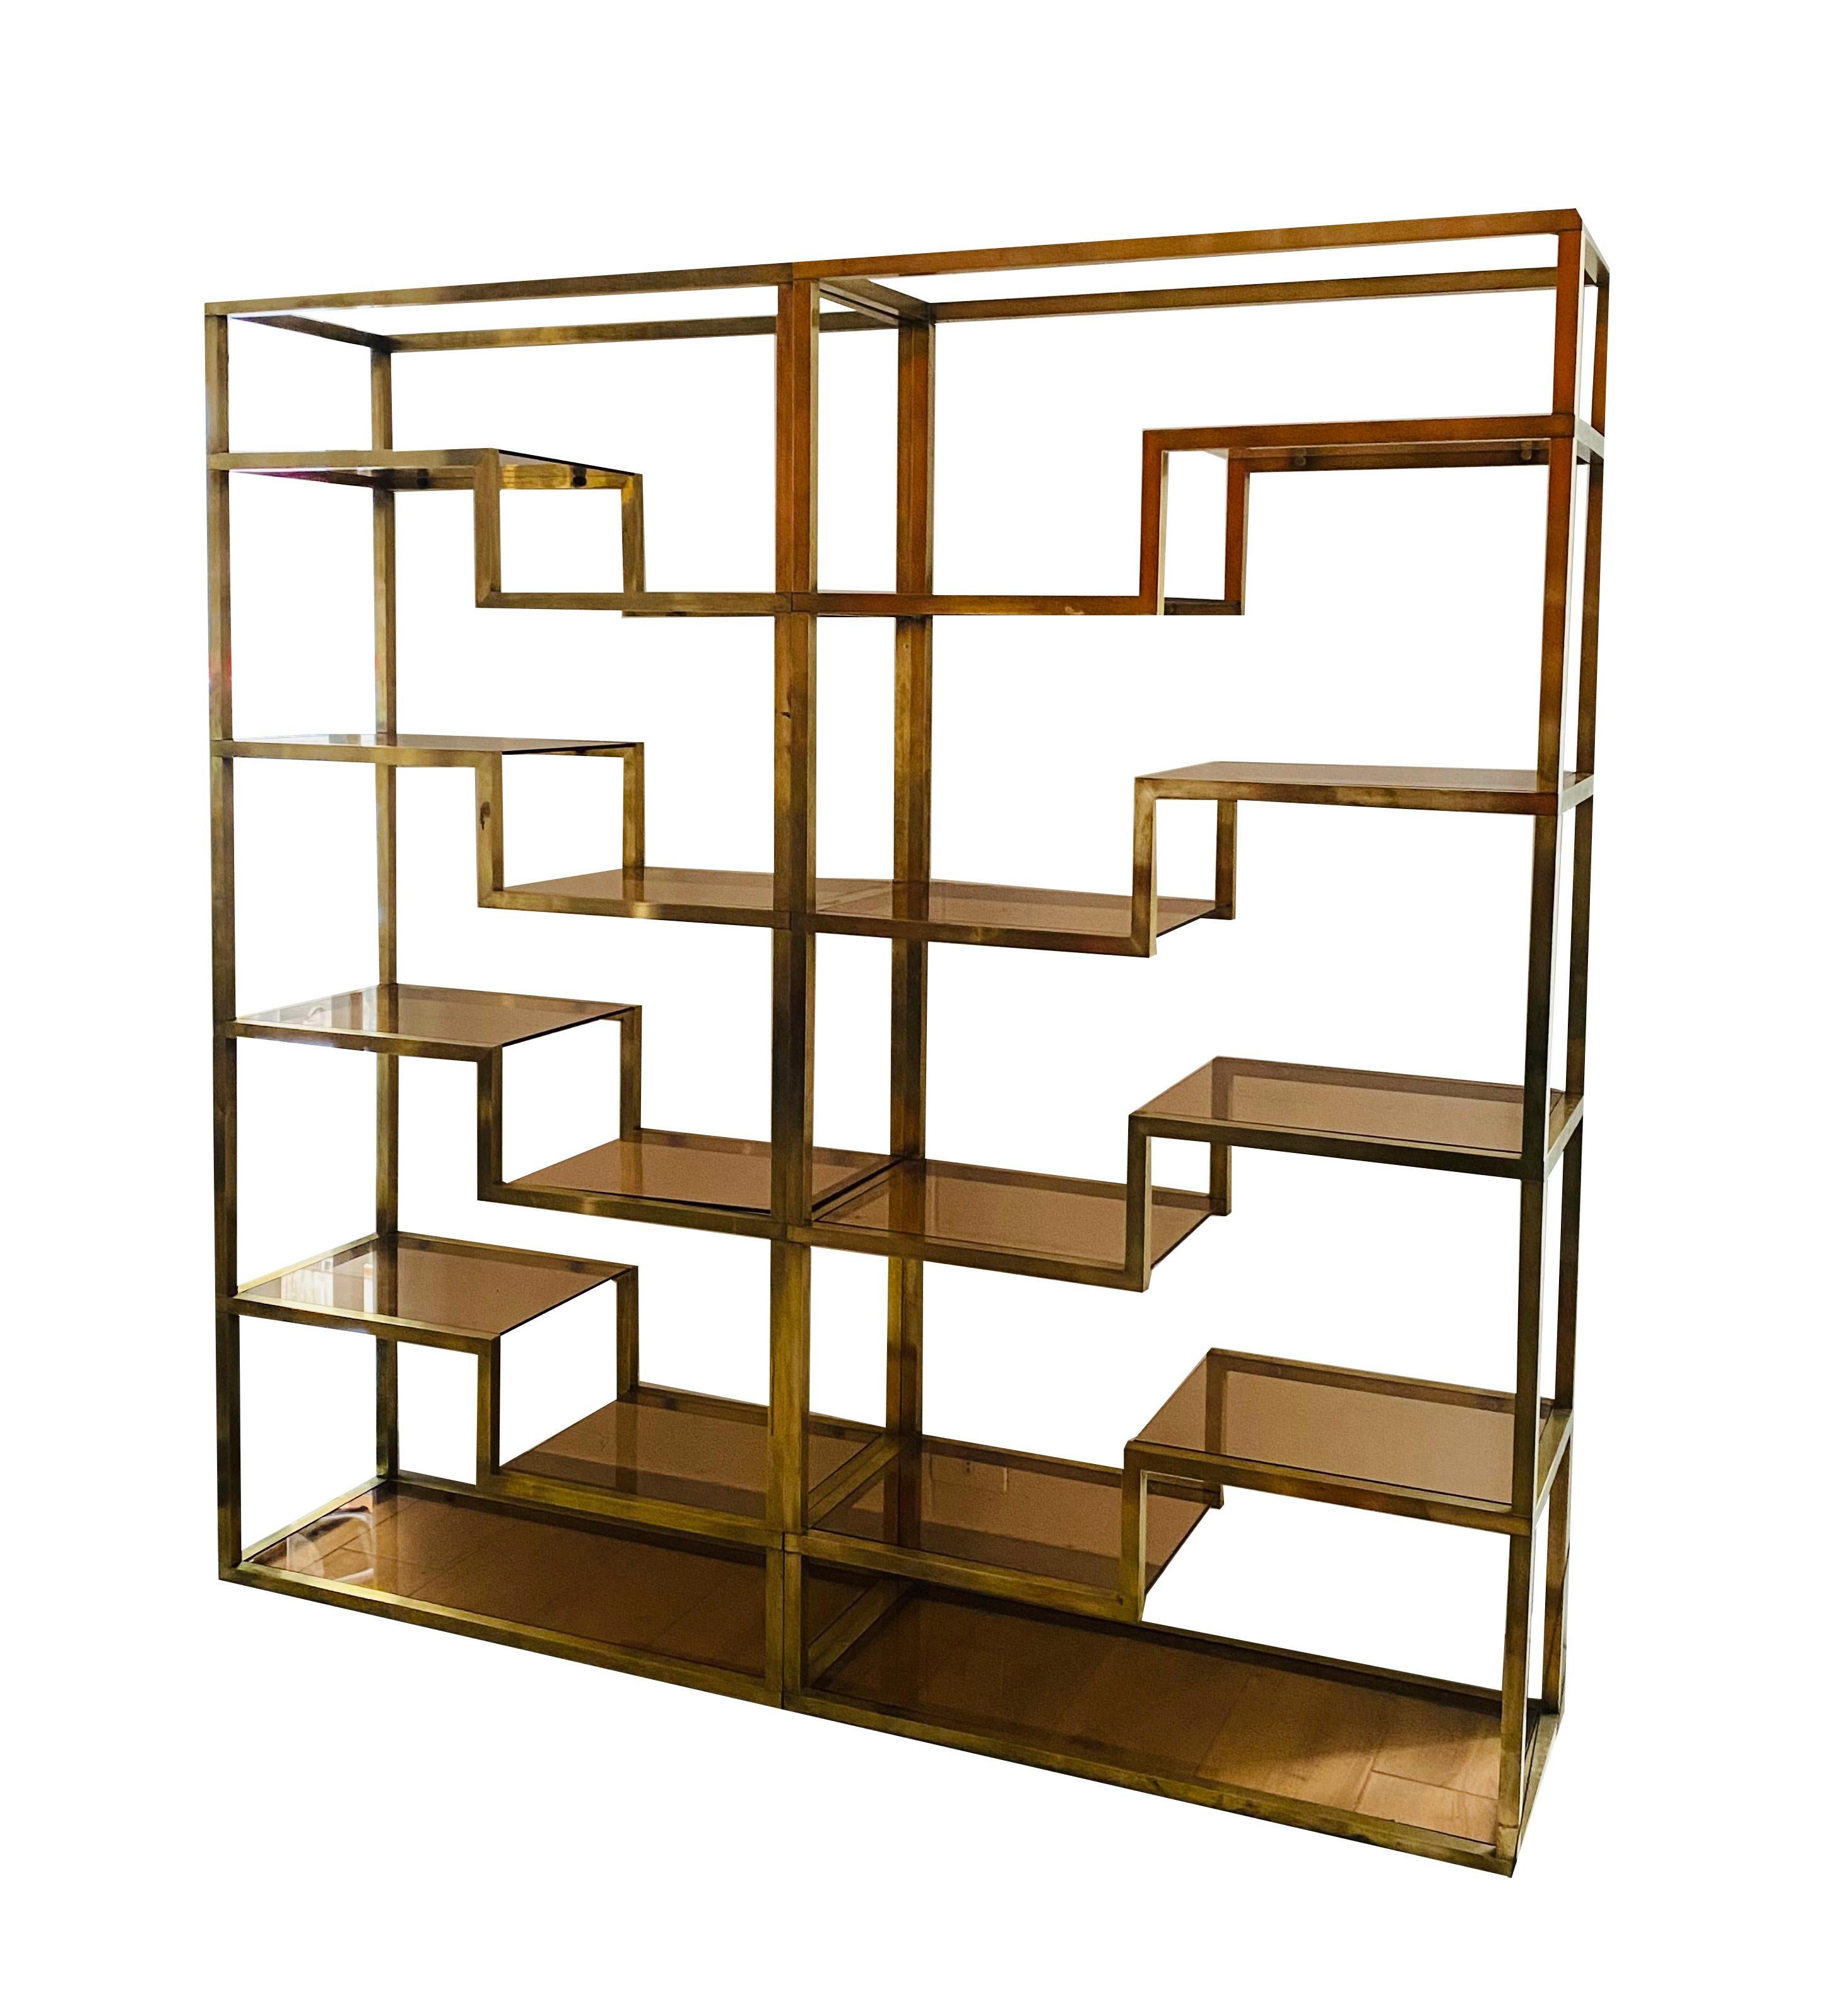 Italian etagere from the 1970s designed by Romeo Rega with a large rectangular shape, the brass structure supports several light brown glass shelves'. It consists of two etagere tables placed side by side, which can be arranged as desired, if